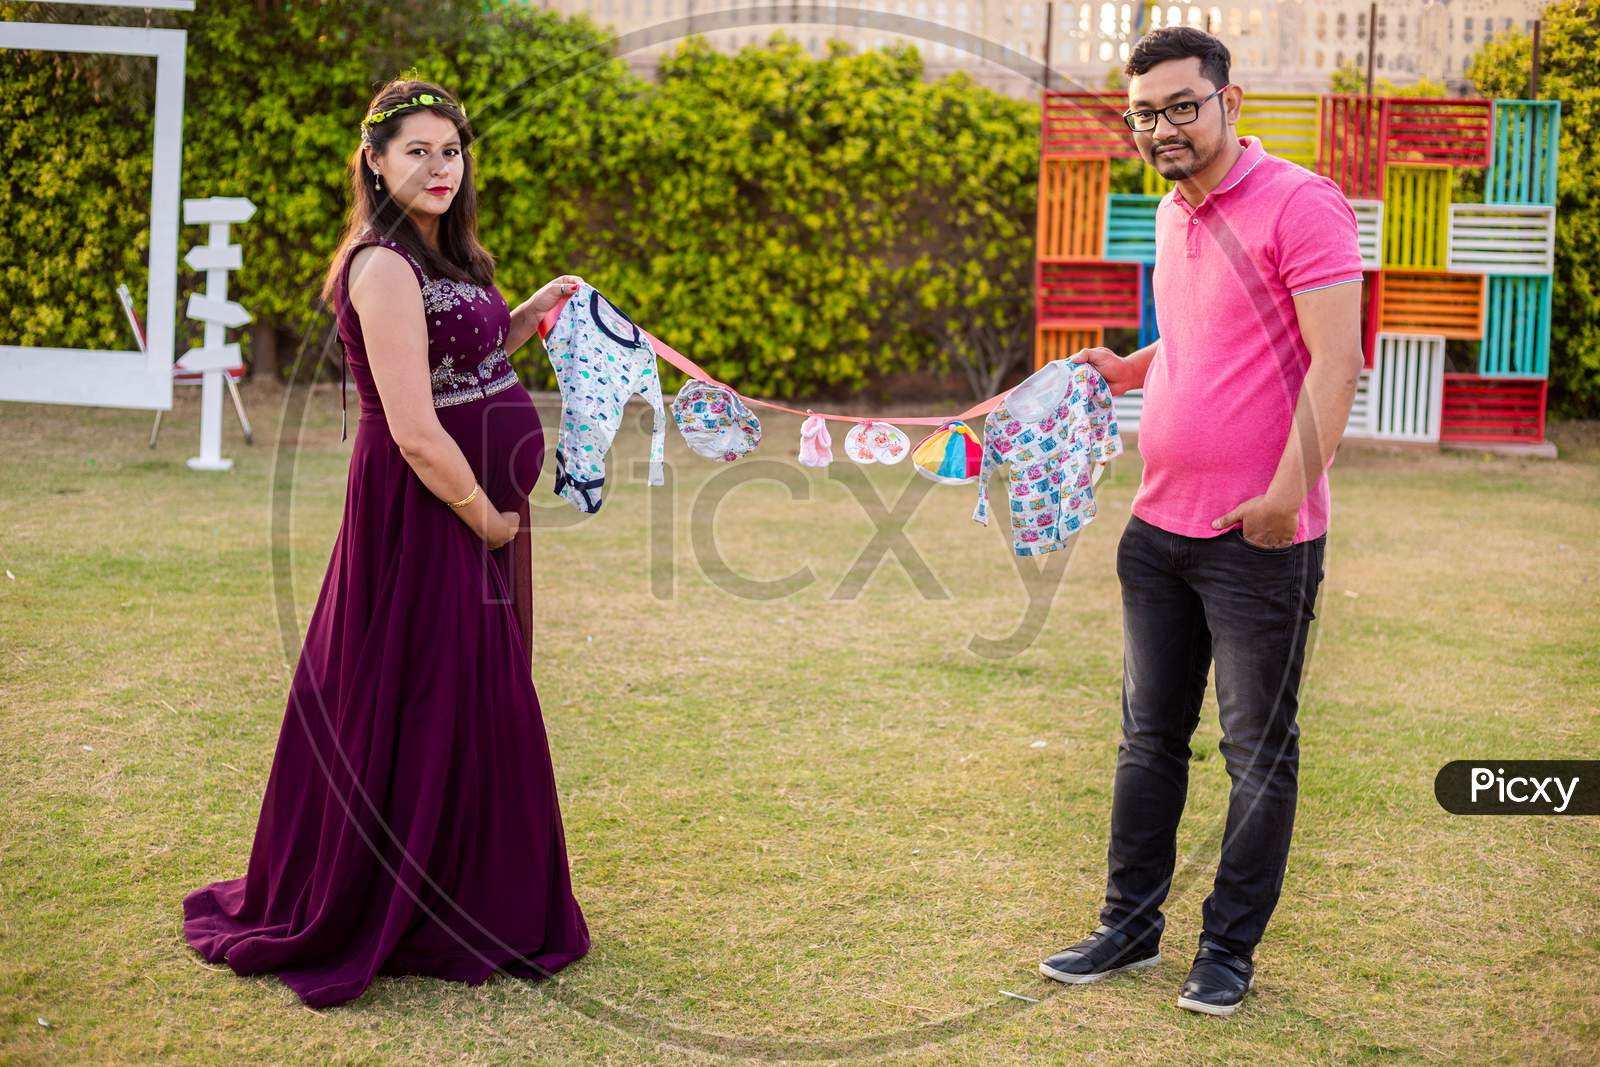 Asian Indian Pregnant Couple Holding Lots Cloth Line With Lots Of Colorful Cute Baby Outfits Standing In A Park Or Garden, Looking At Camera. Maternity Concept